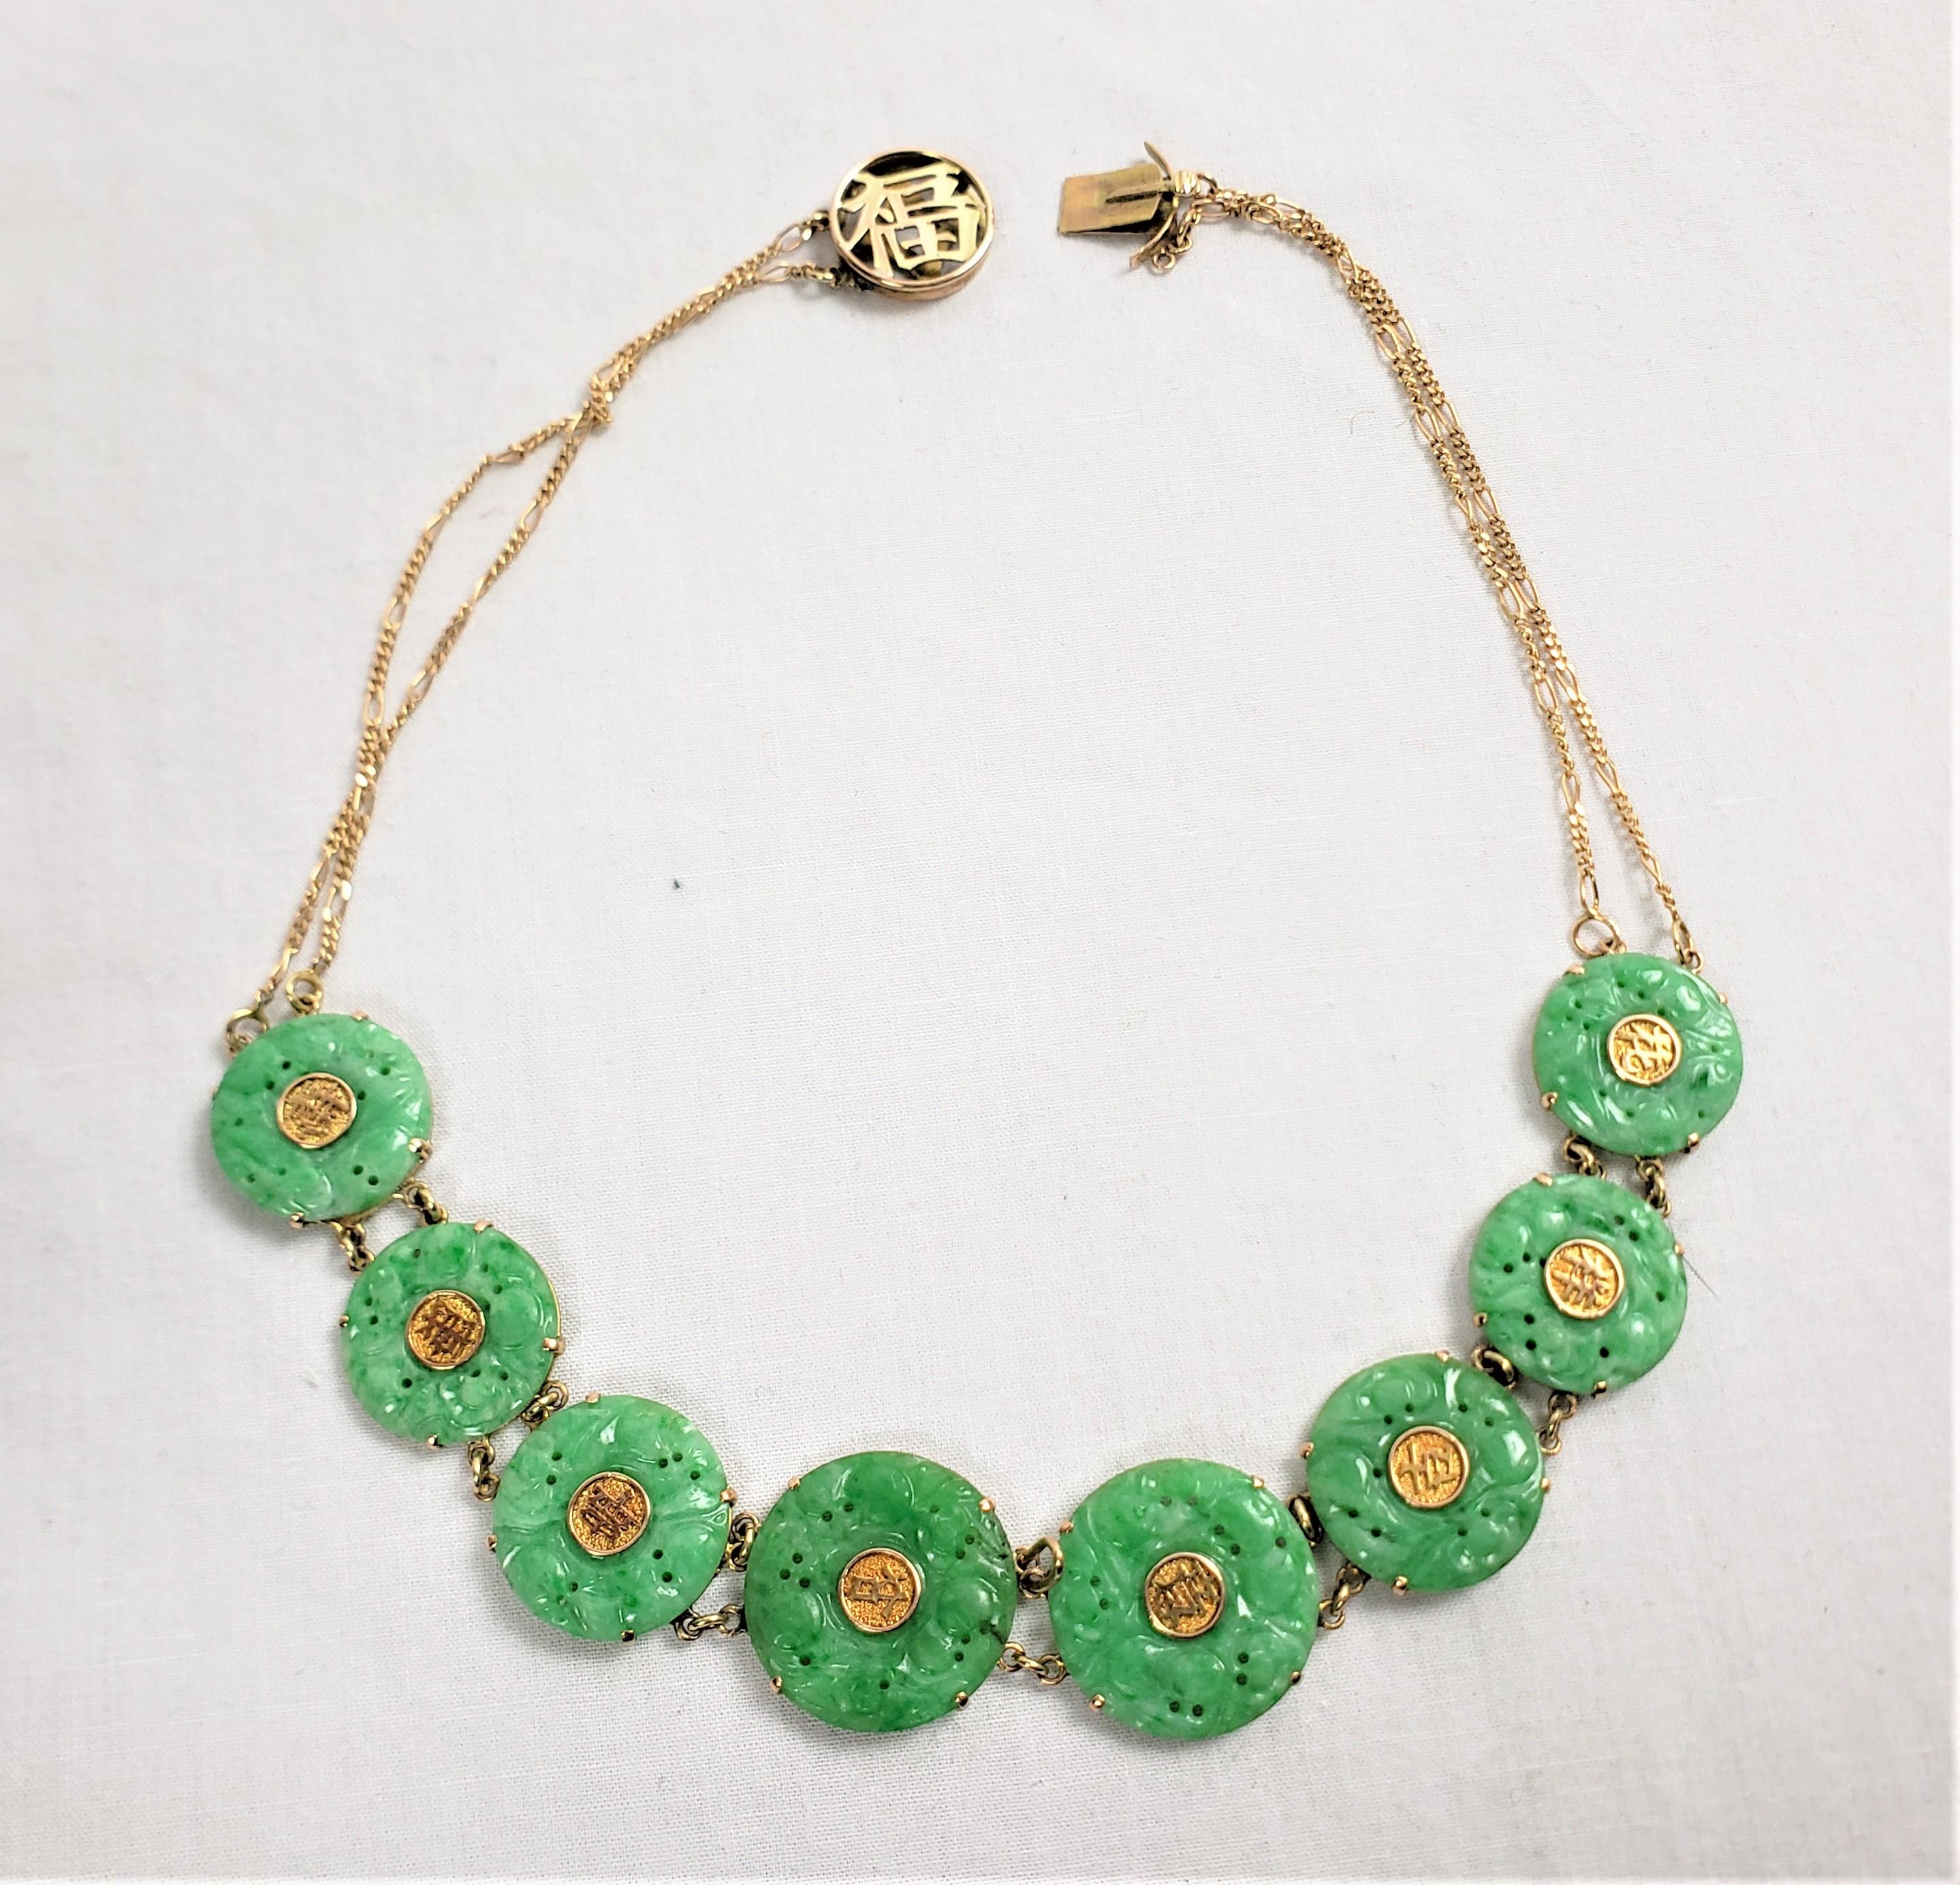 This antique necklace is signed by an unknown maker and originates from China, dating to approximately 1920 and done in the period Chinese Export style. The necklace is composed of 14 karat yellow gold and carved green jade floral discs with gold